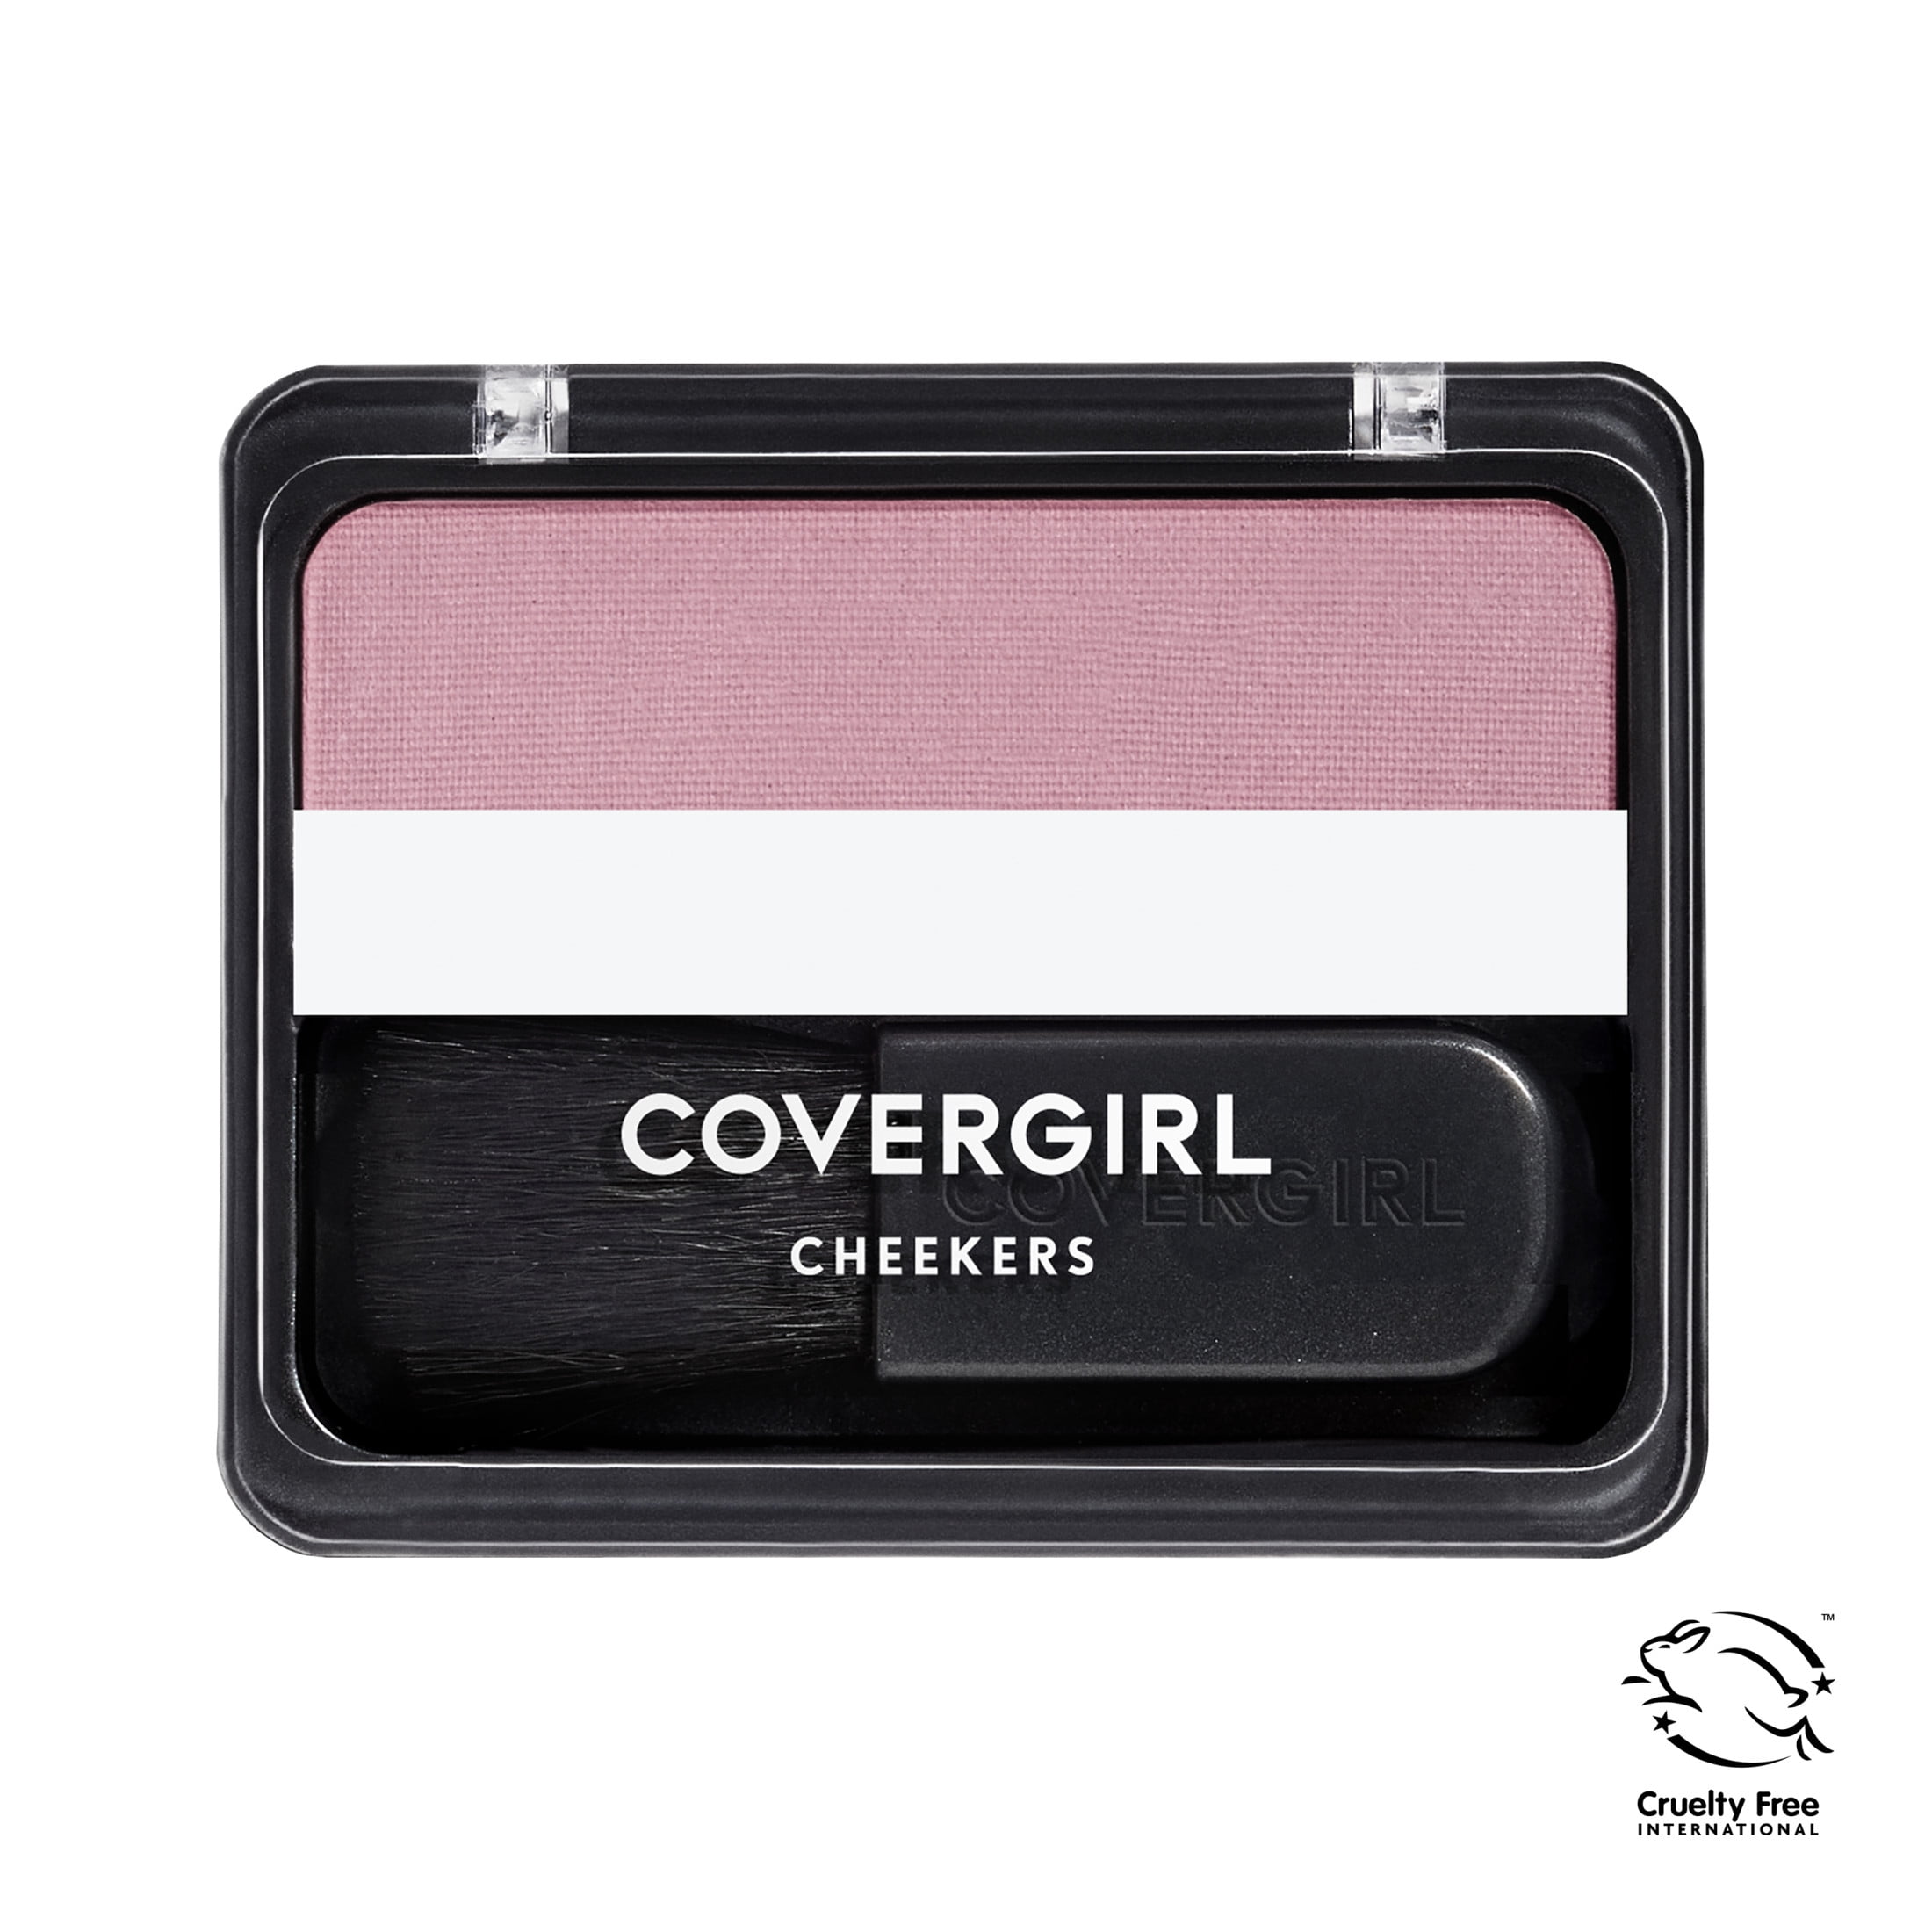 COVERGIRL Cheekers Blendable Powder Blush, 185 True Plum, 0.12 oz, Easy-to-Apply Soft Powder Blush, Brushes on for Natural Looking Color, Easy-to-Carry-Compact